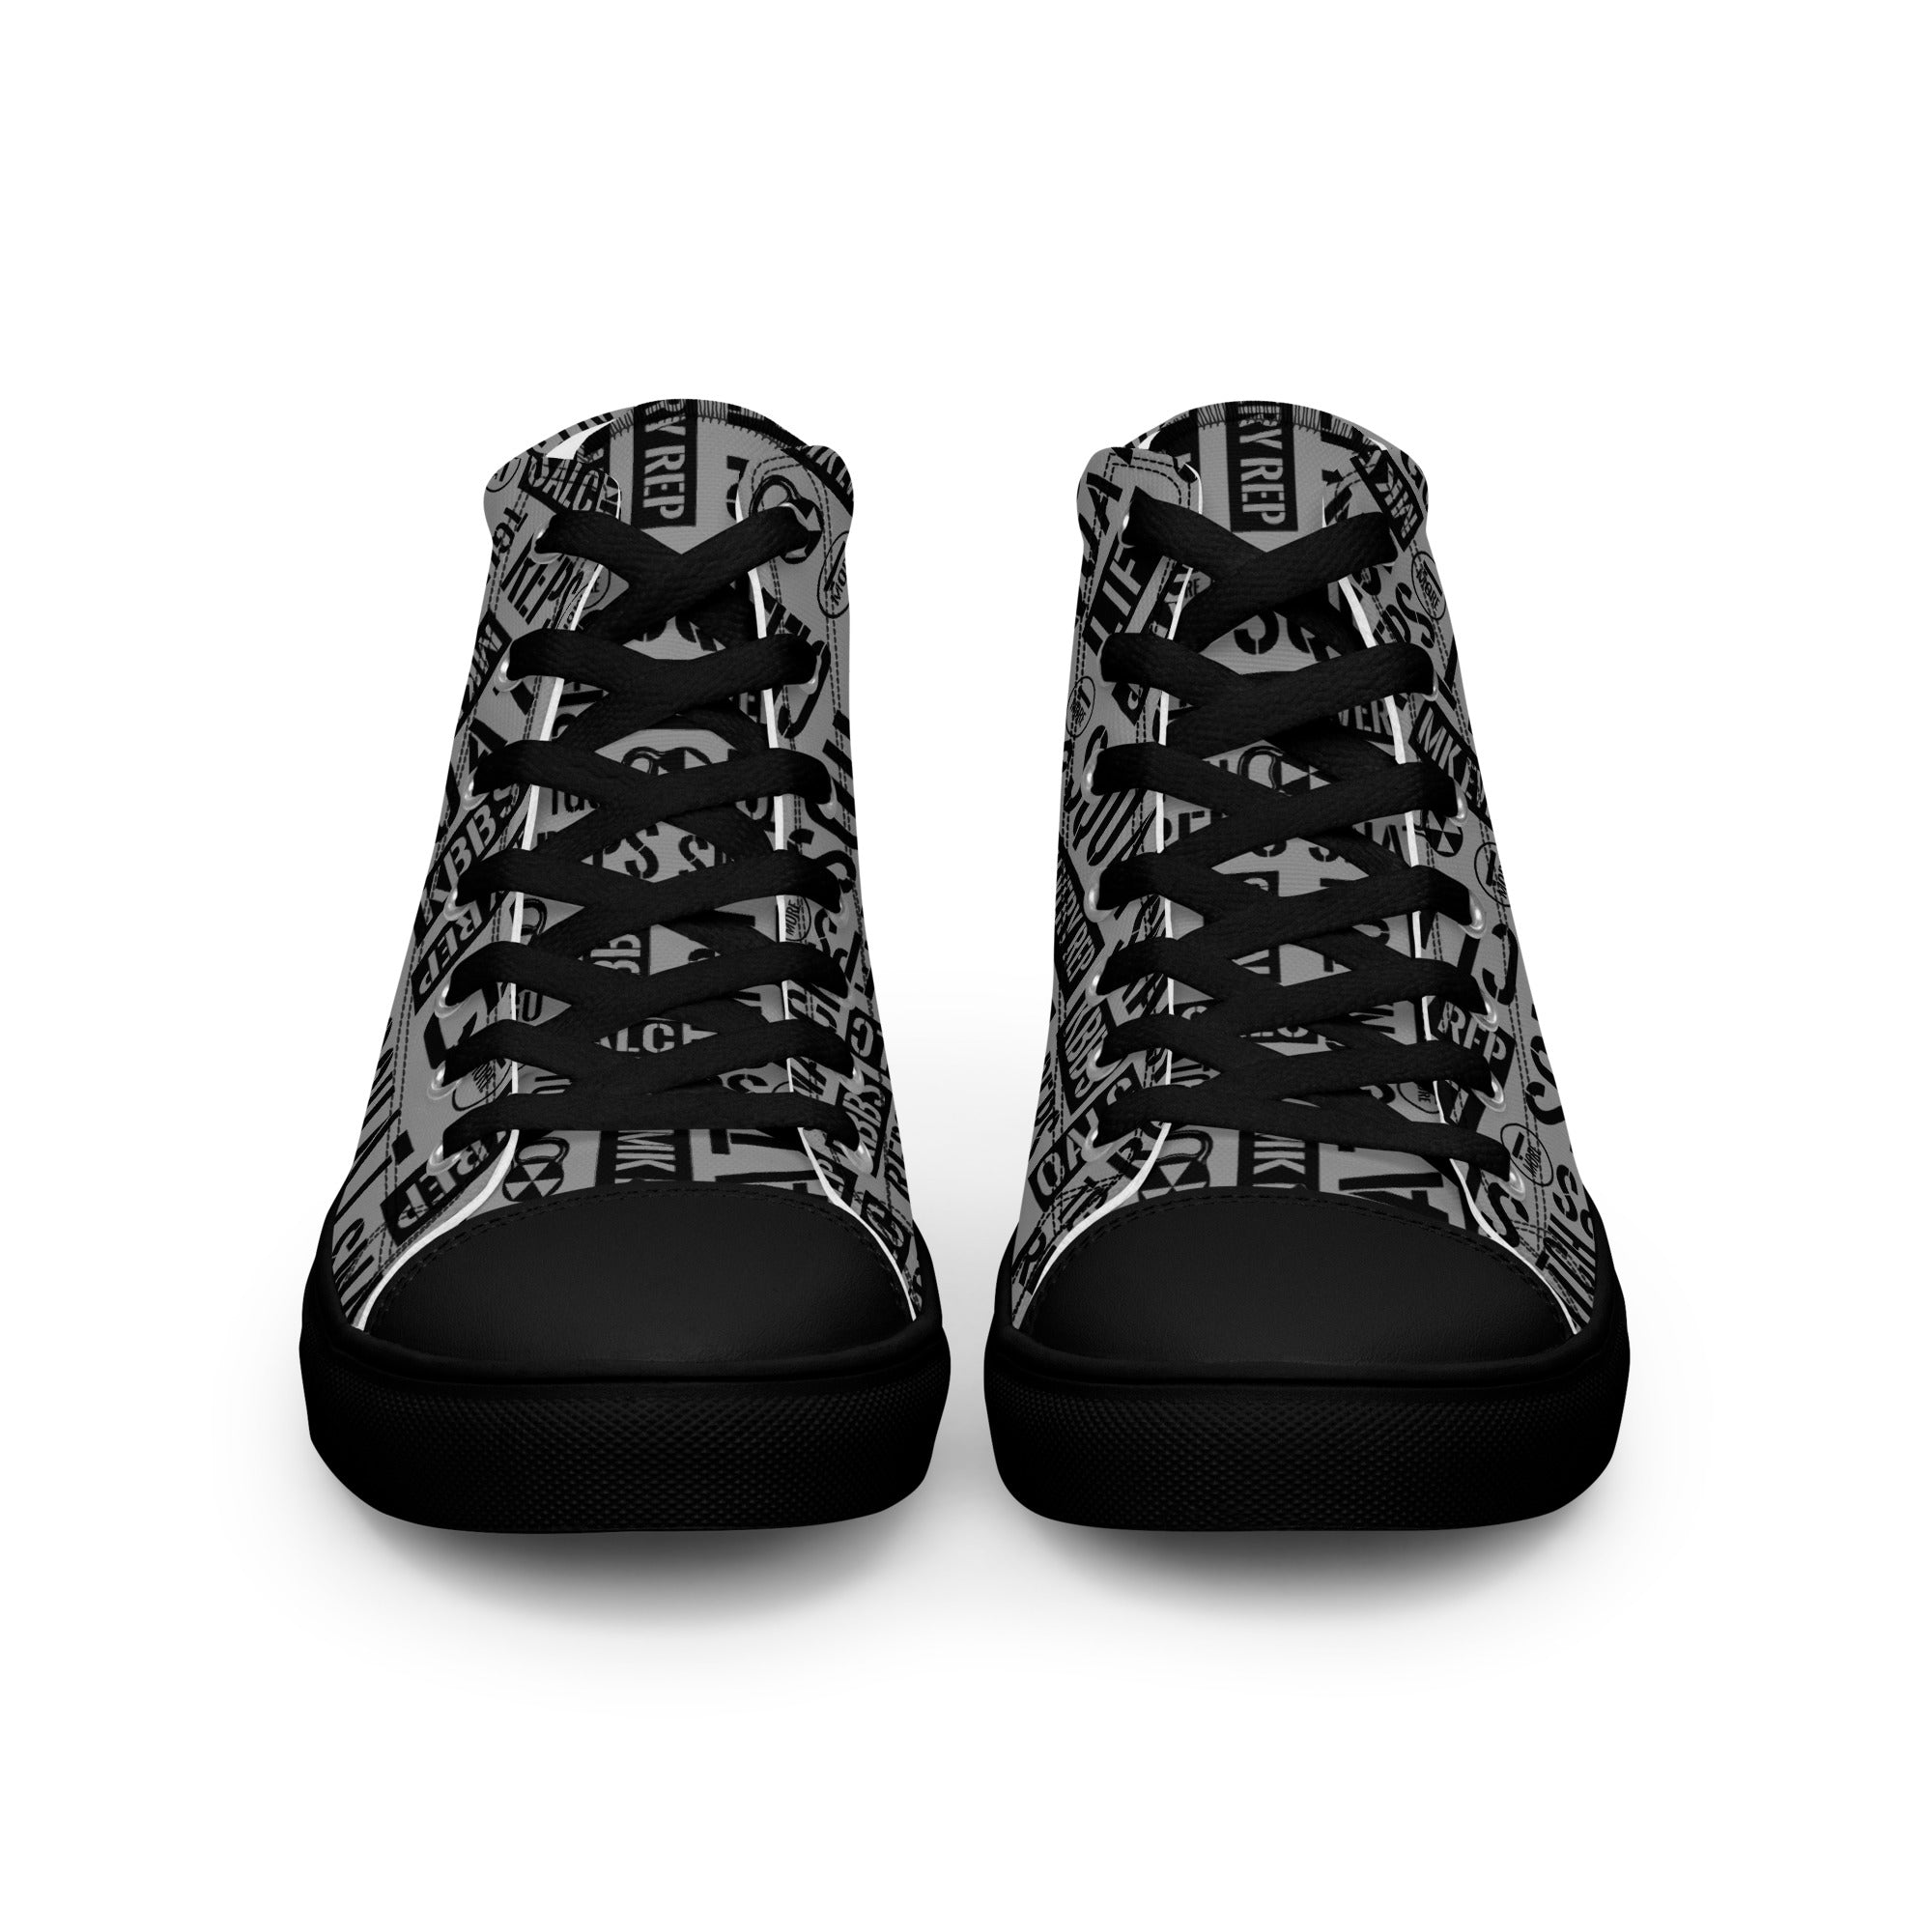 Men’s Charcoal Acronyms Black High Tops Canvas Shoes